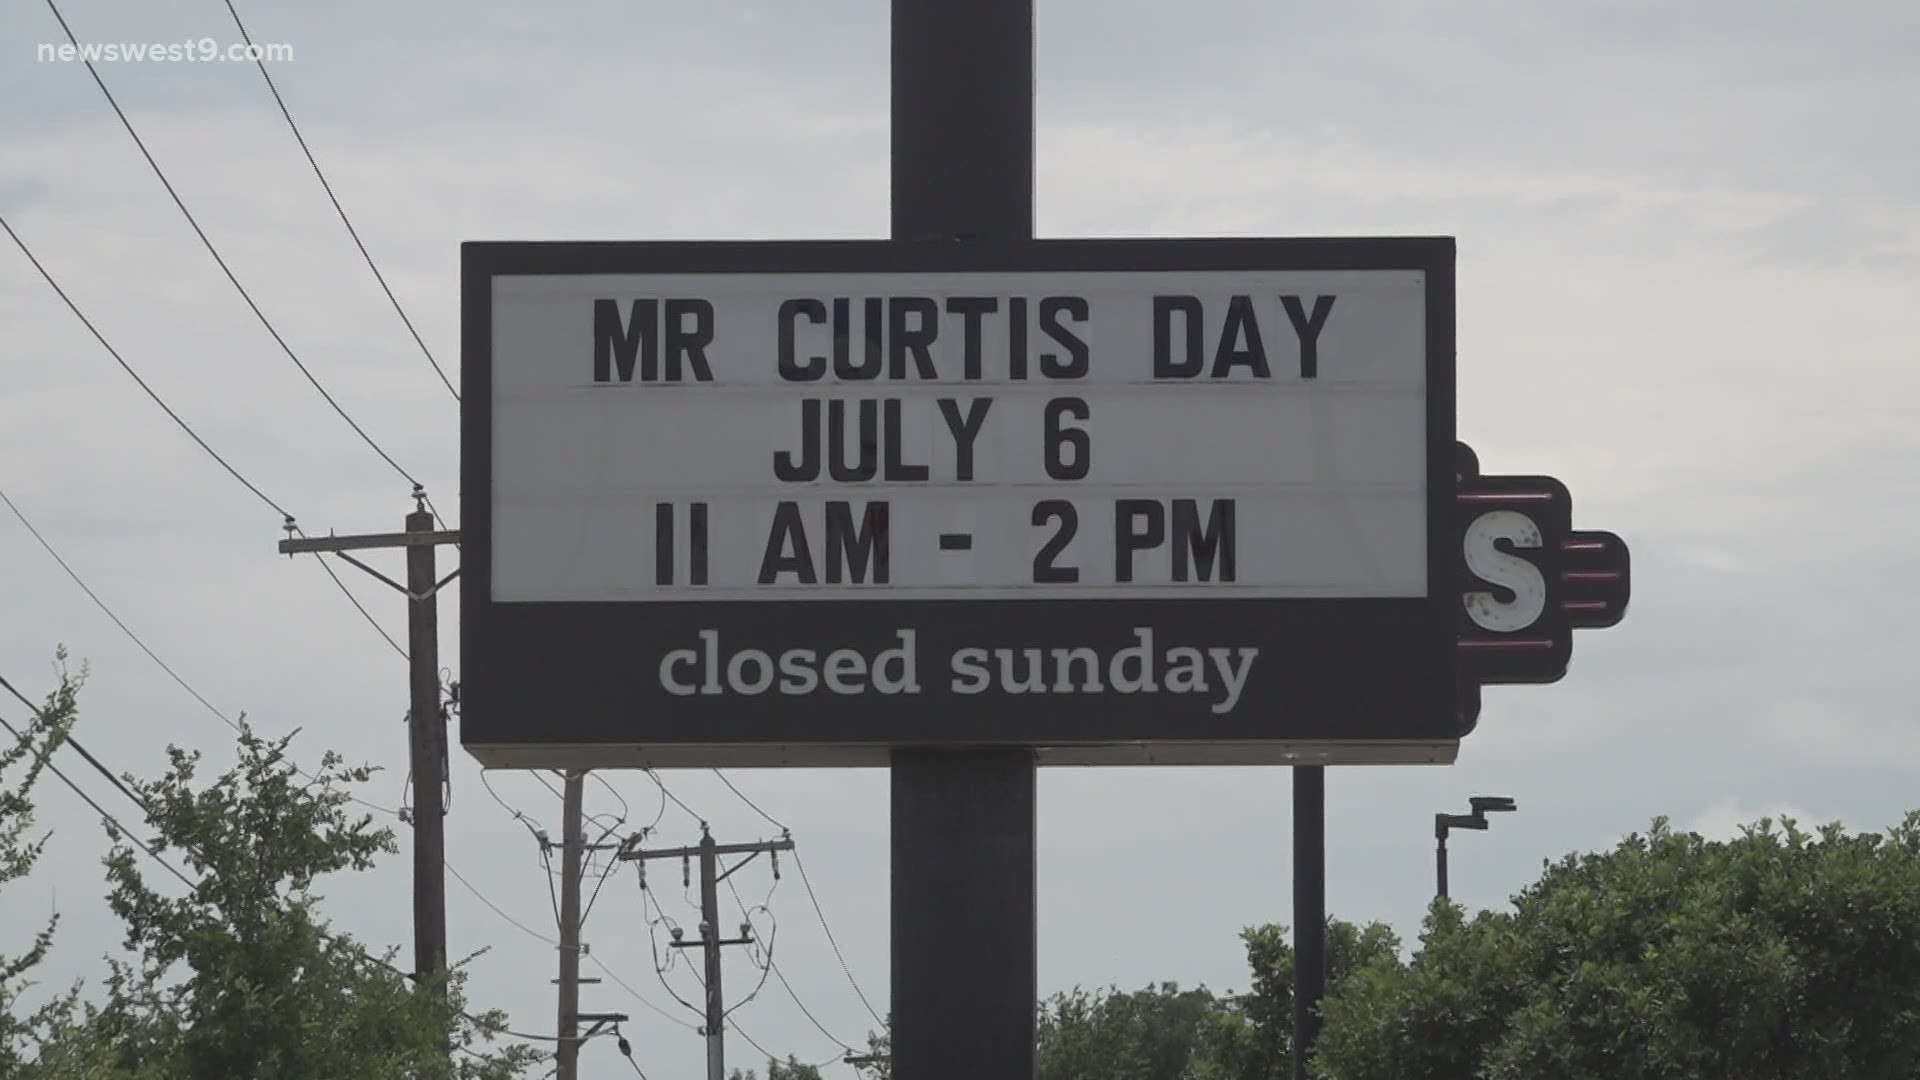 Chick-Fil-A employees celebrate and welcome back their charismatic coworker, Mr. Curtis. "He's just such a joyful, uplifting spirit." "He brightens your day."